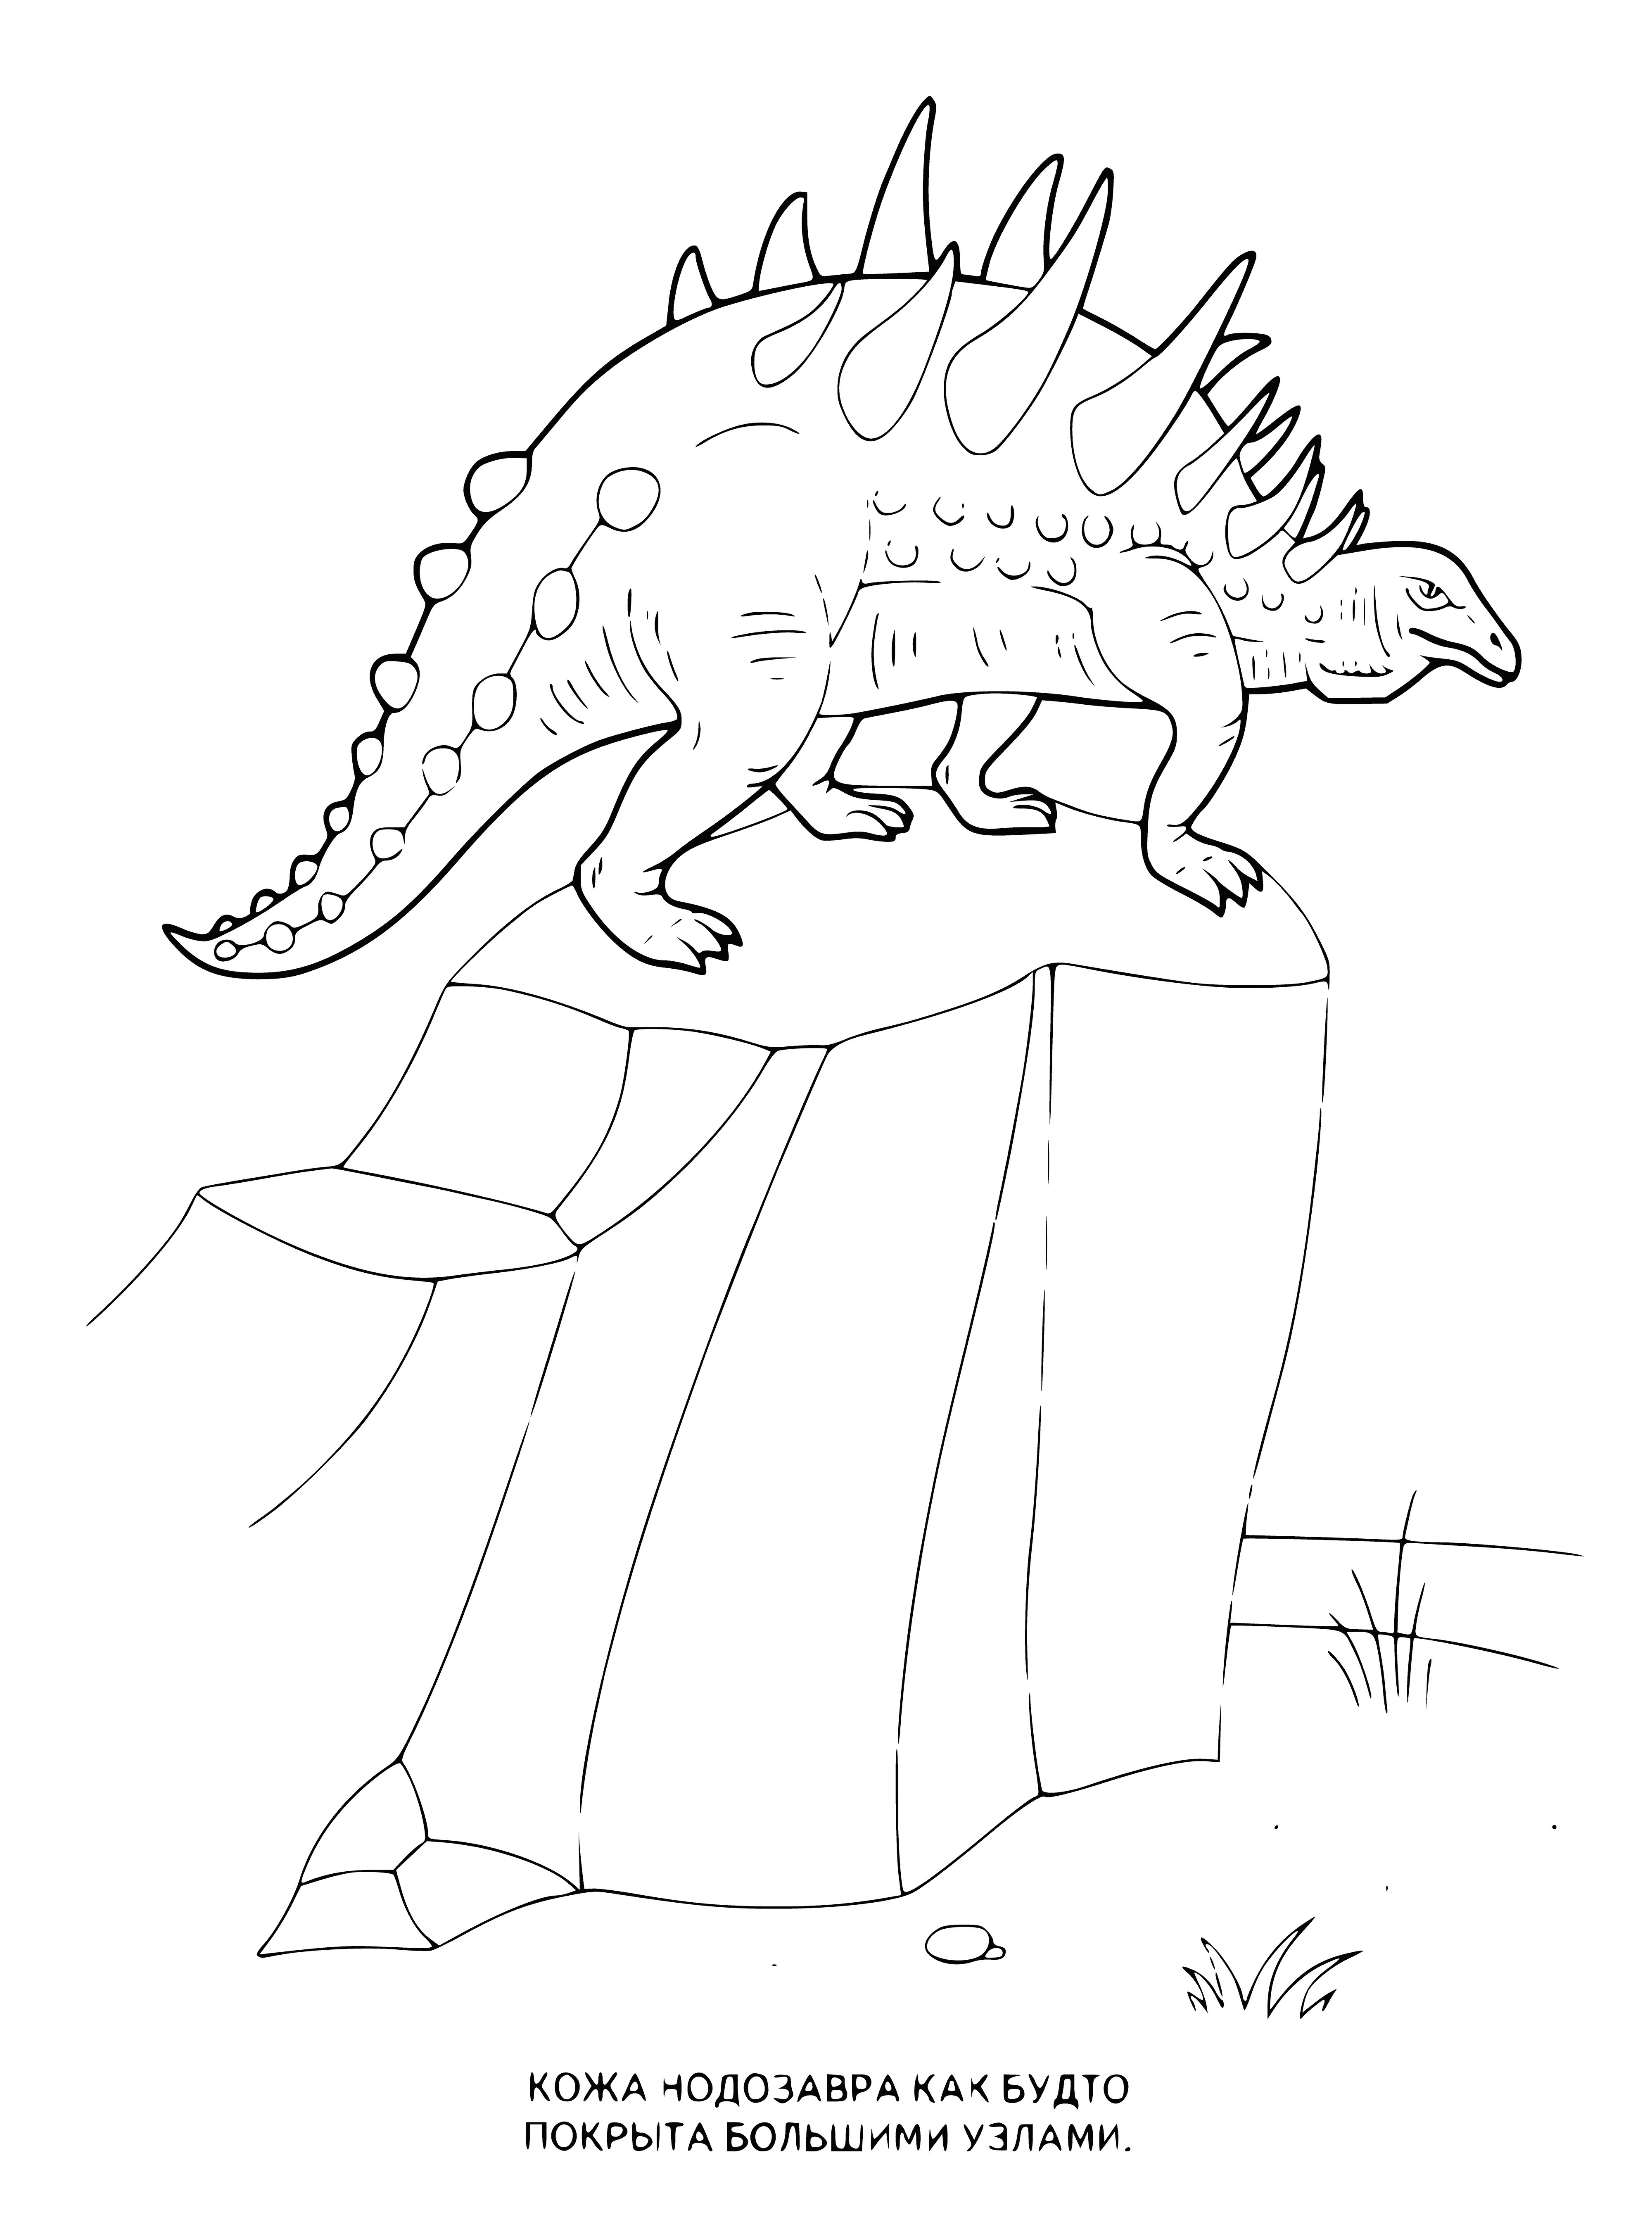 coloring page: A Nodozavr coloring page: a large, four-legged green dino with a long neck, two arms, and a long, pointy beak. #dinosaurs #coloringpages